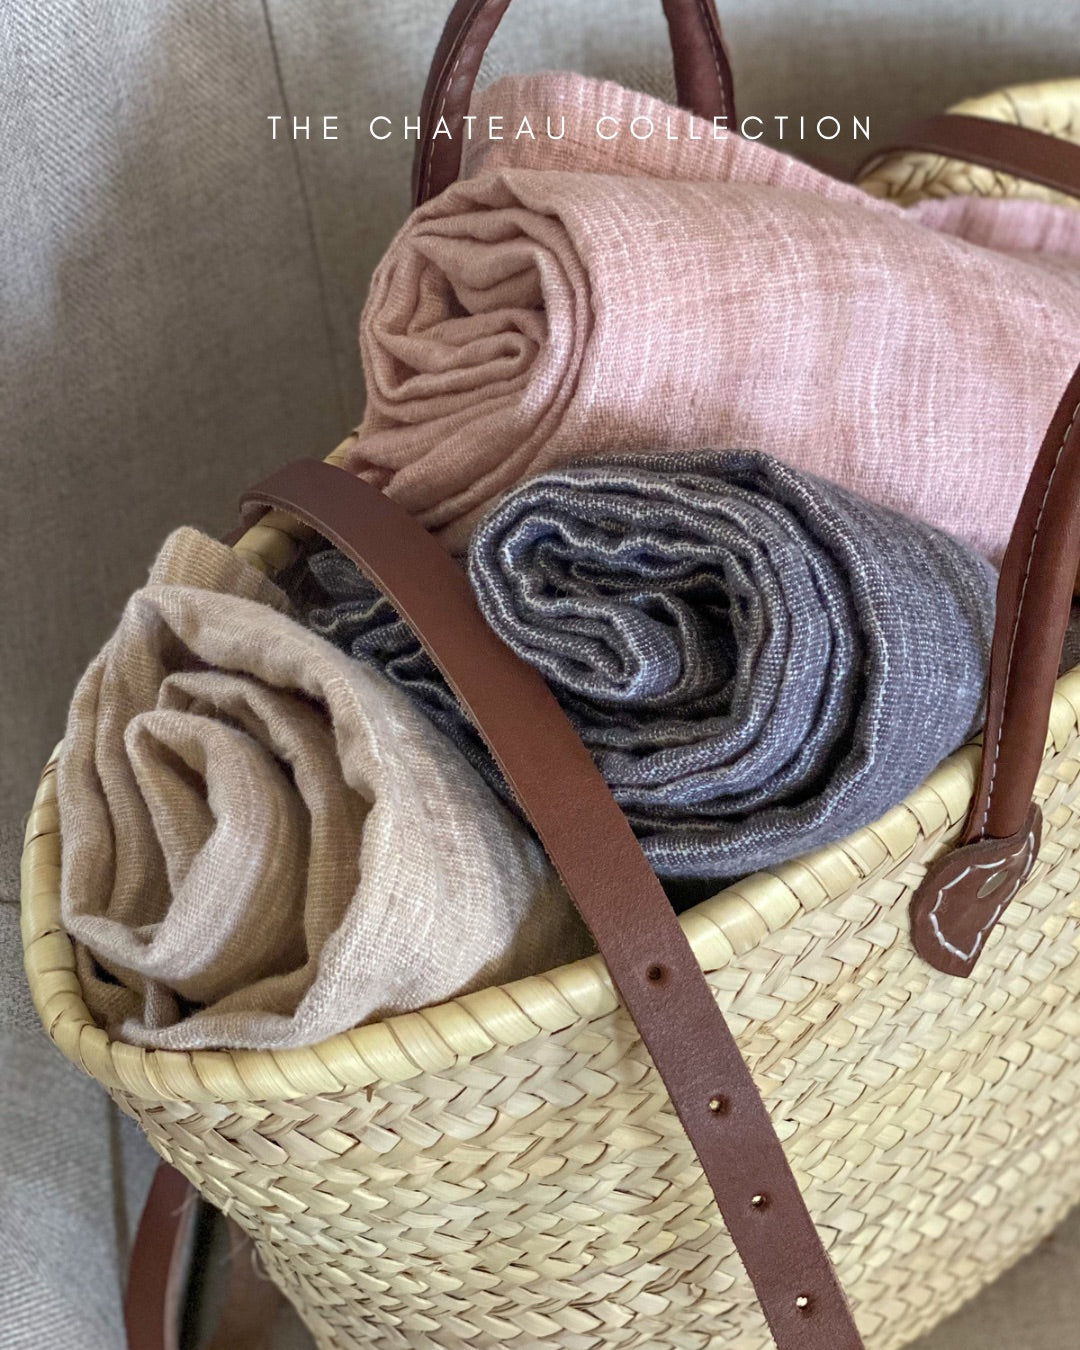 Double-sided linen throws